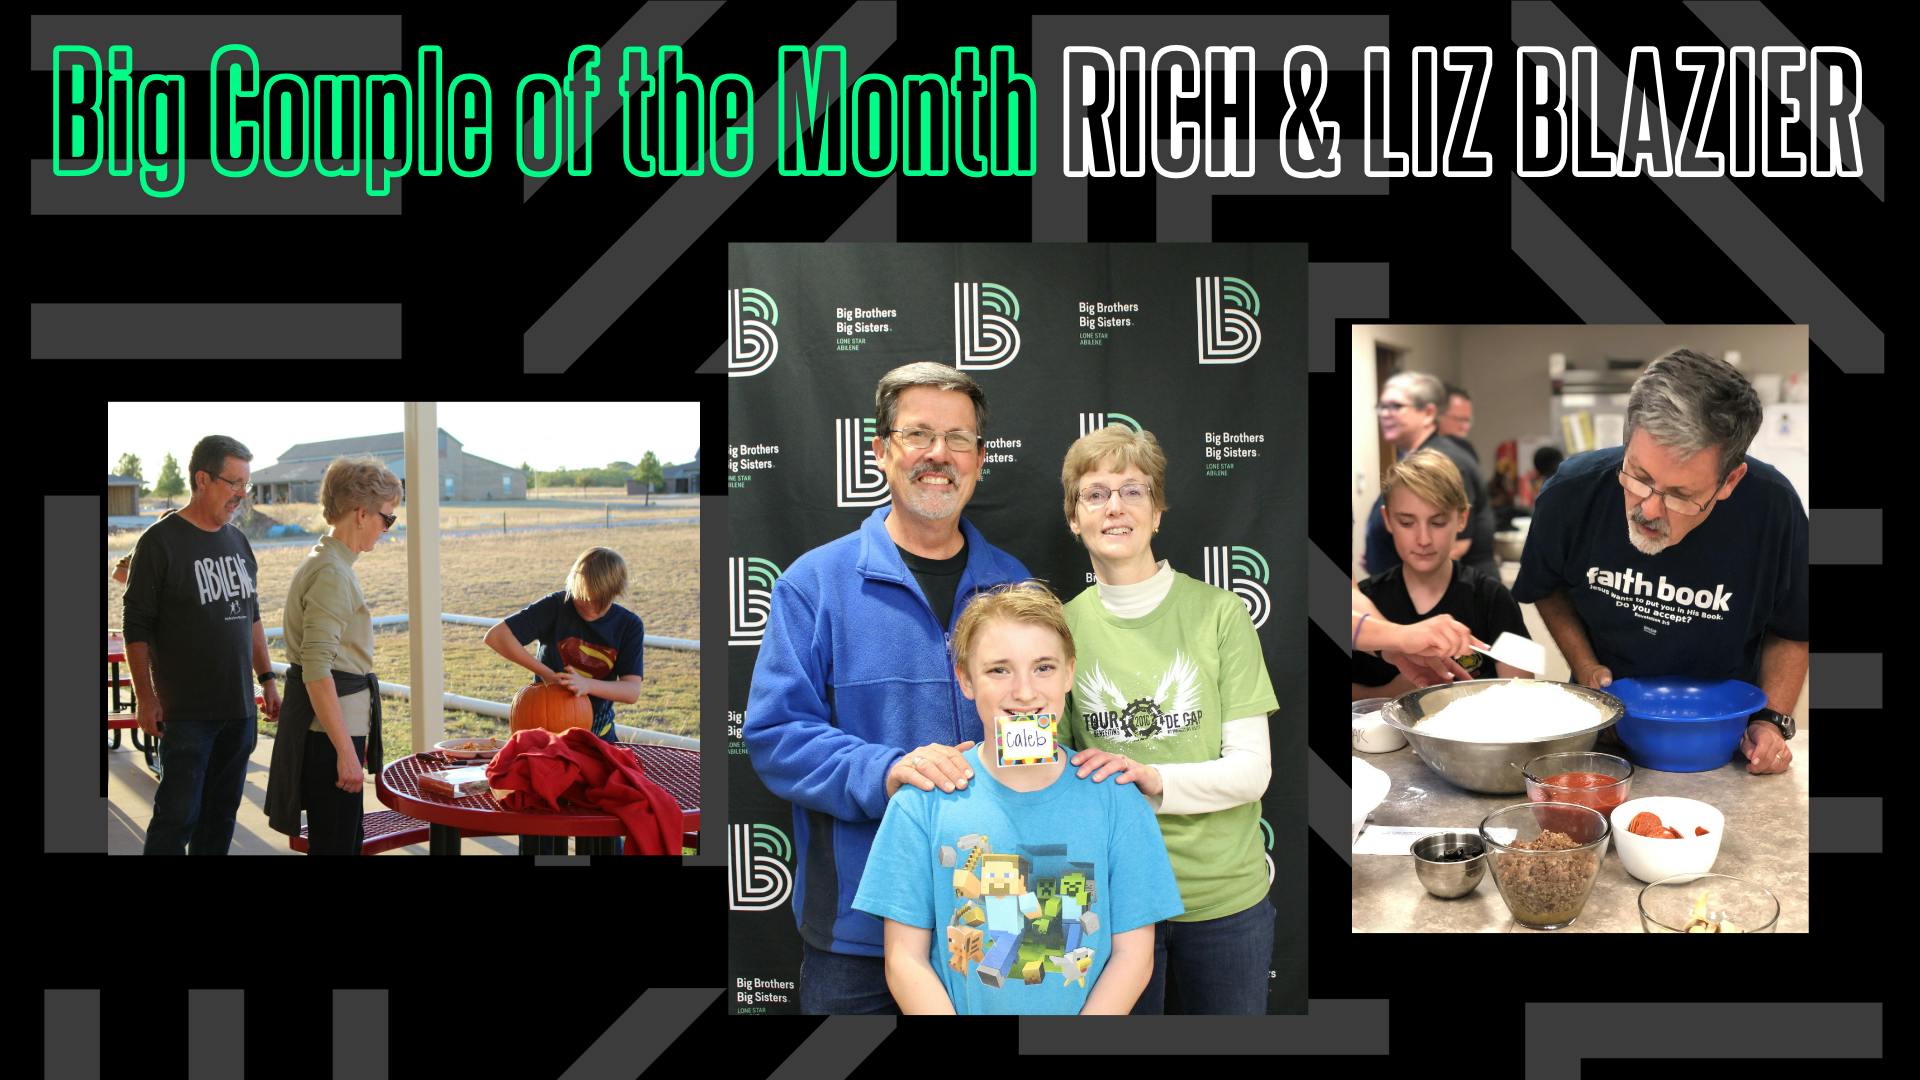 Rich and Liz Blazier - February 2021 Big Couple of the Month cover image